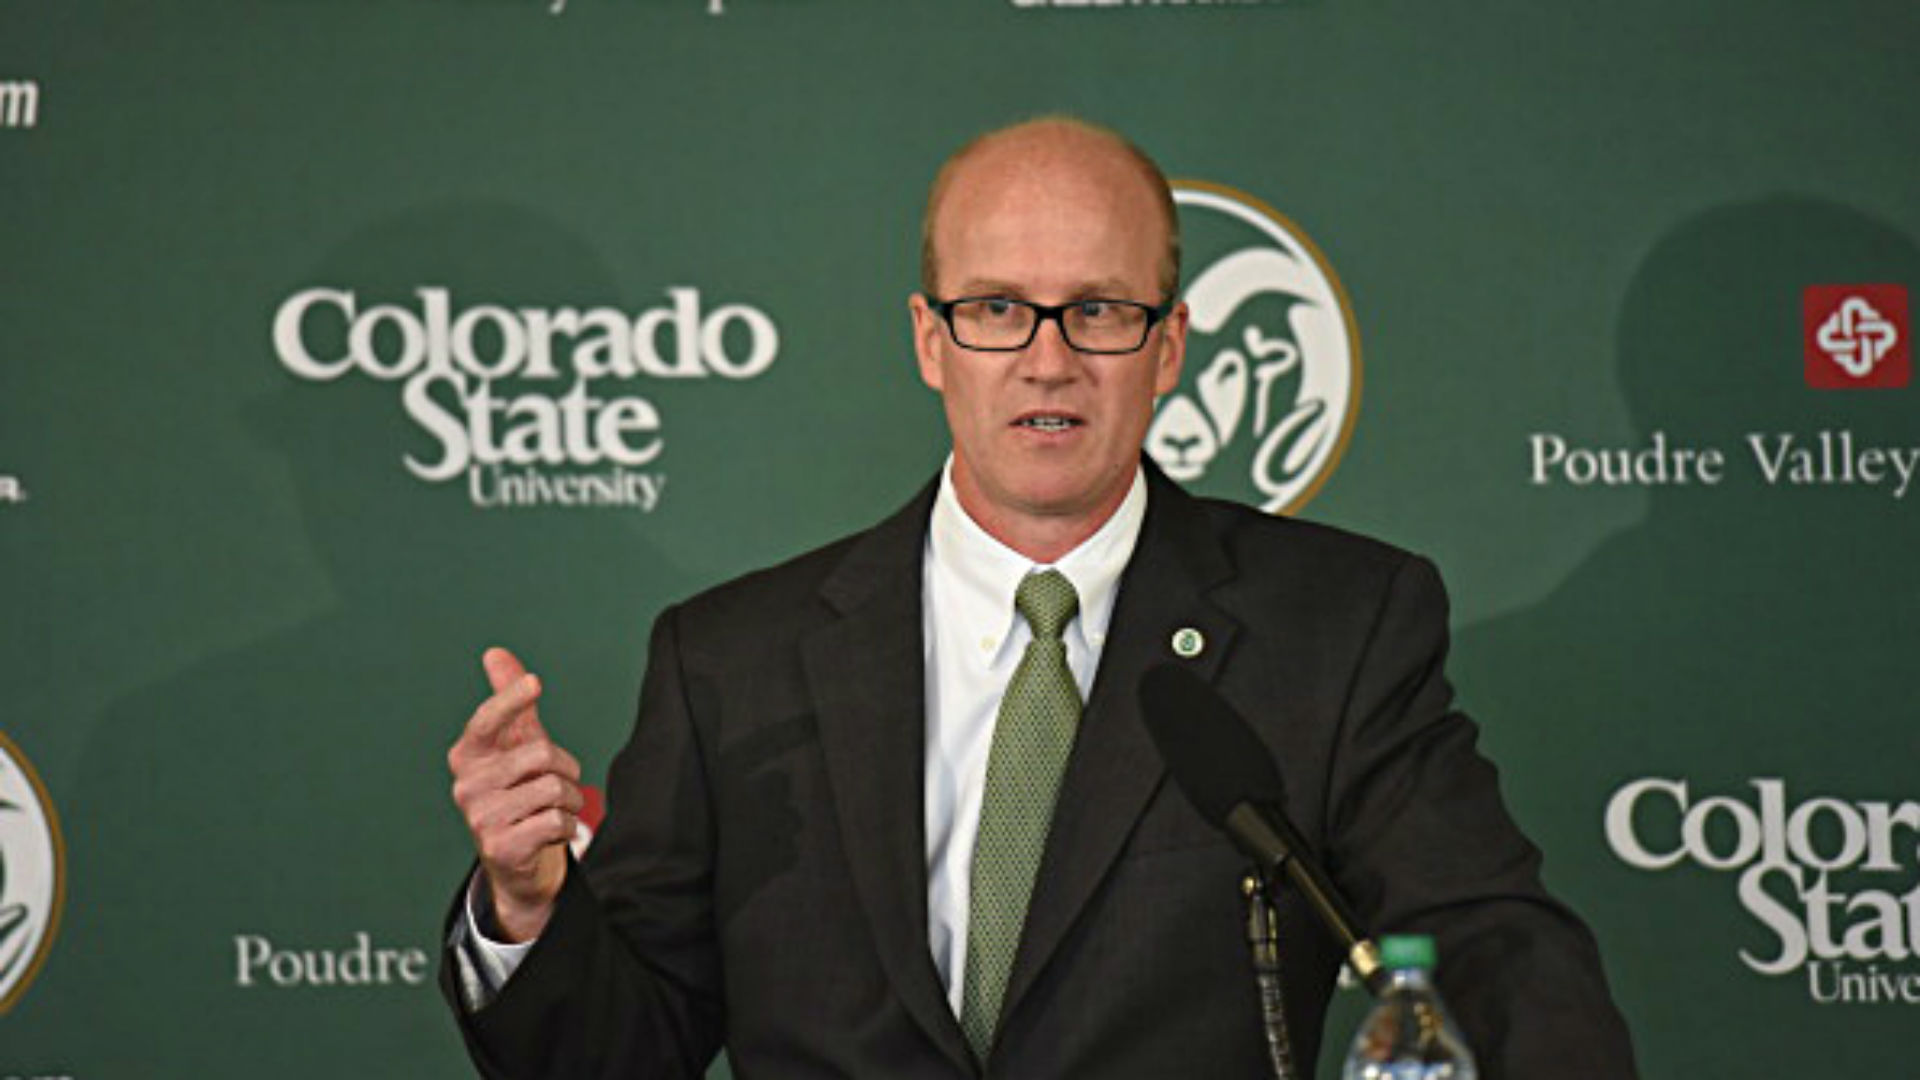 CSU’s Athletic Director, Joe Parker, Talks Sports and Building the College Experience